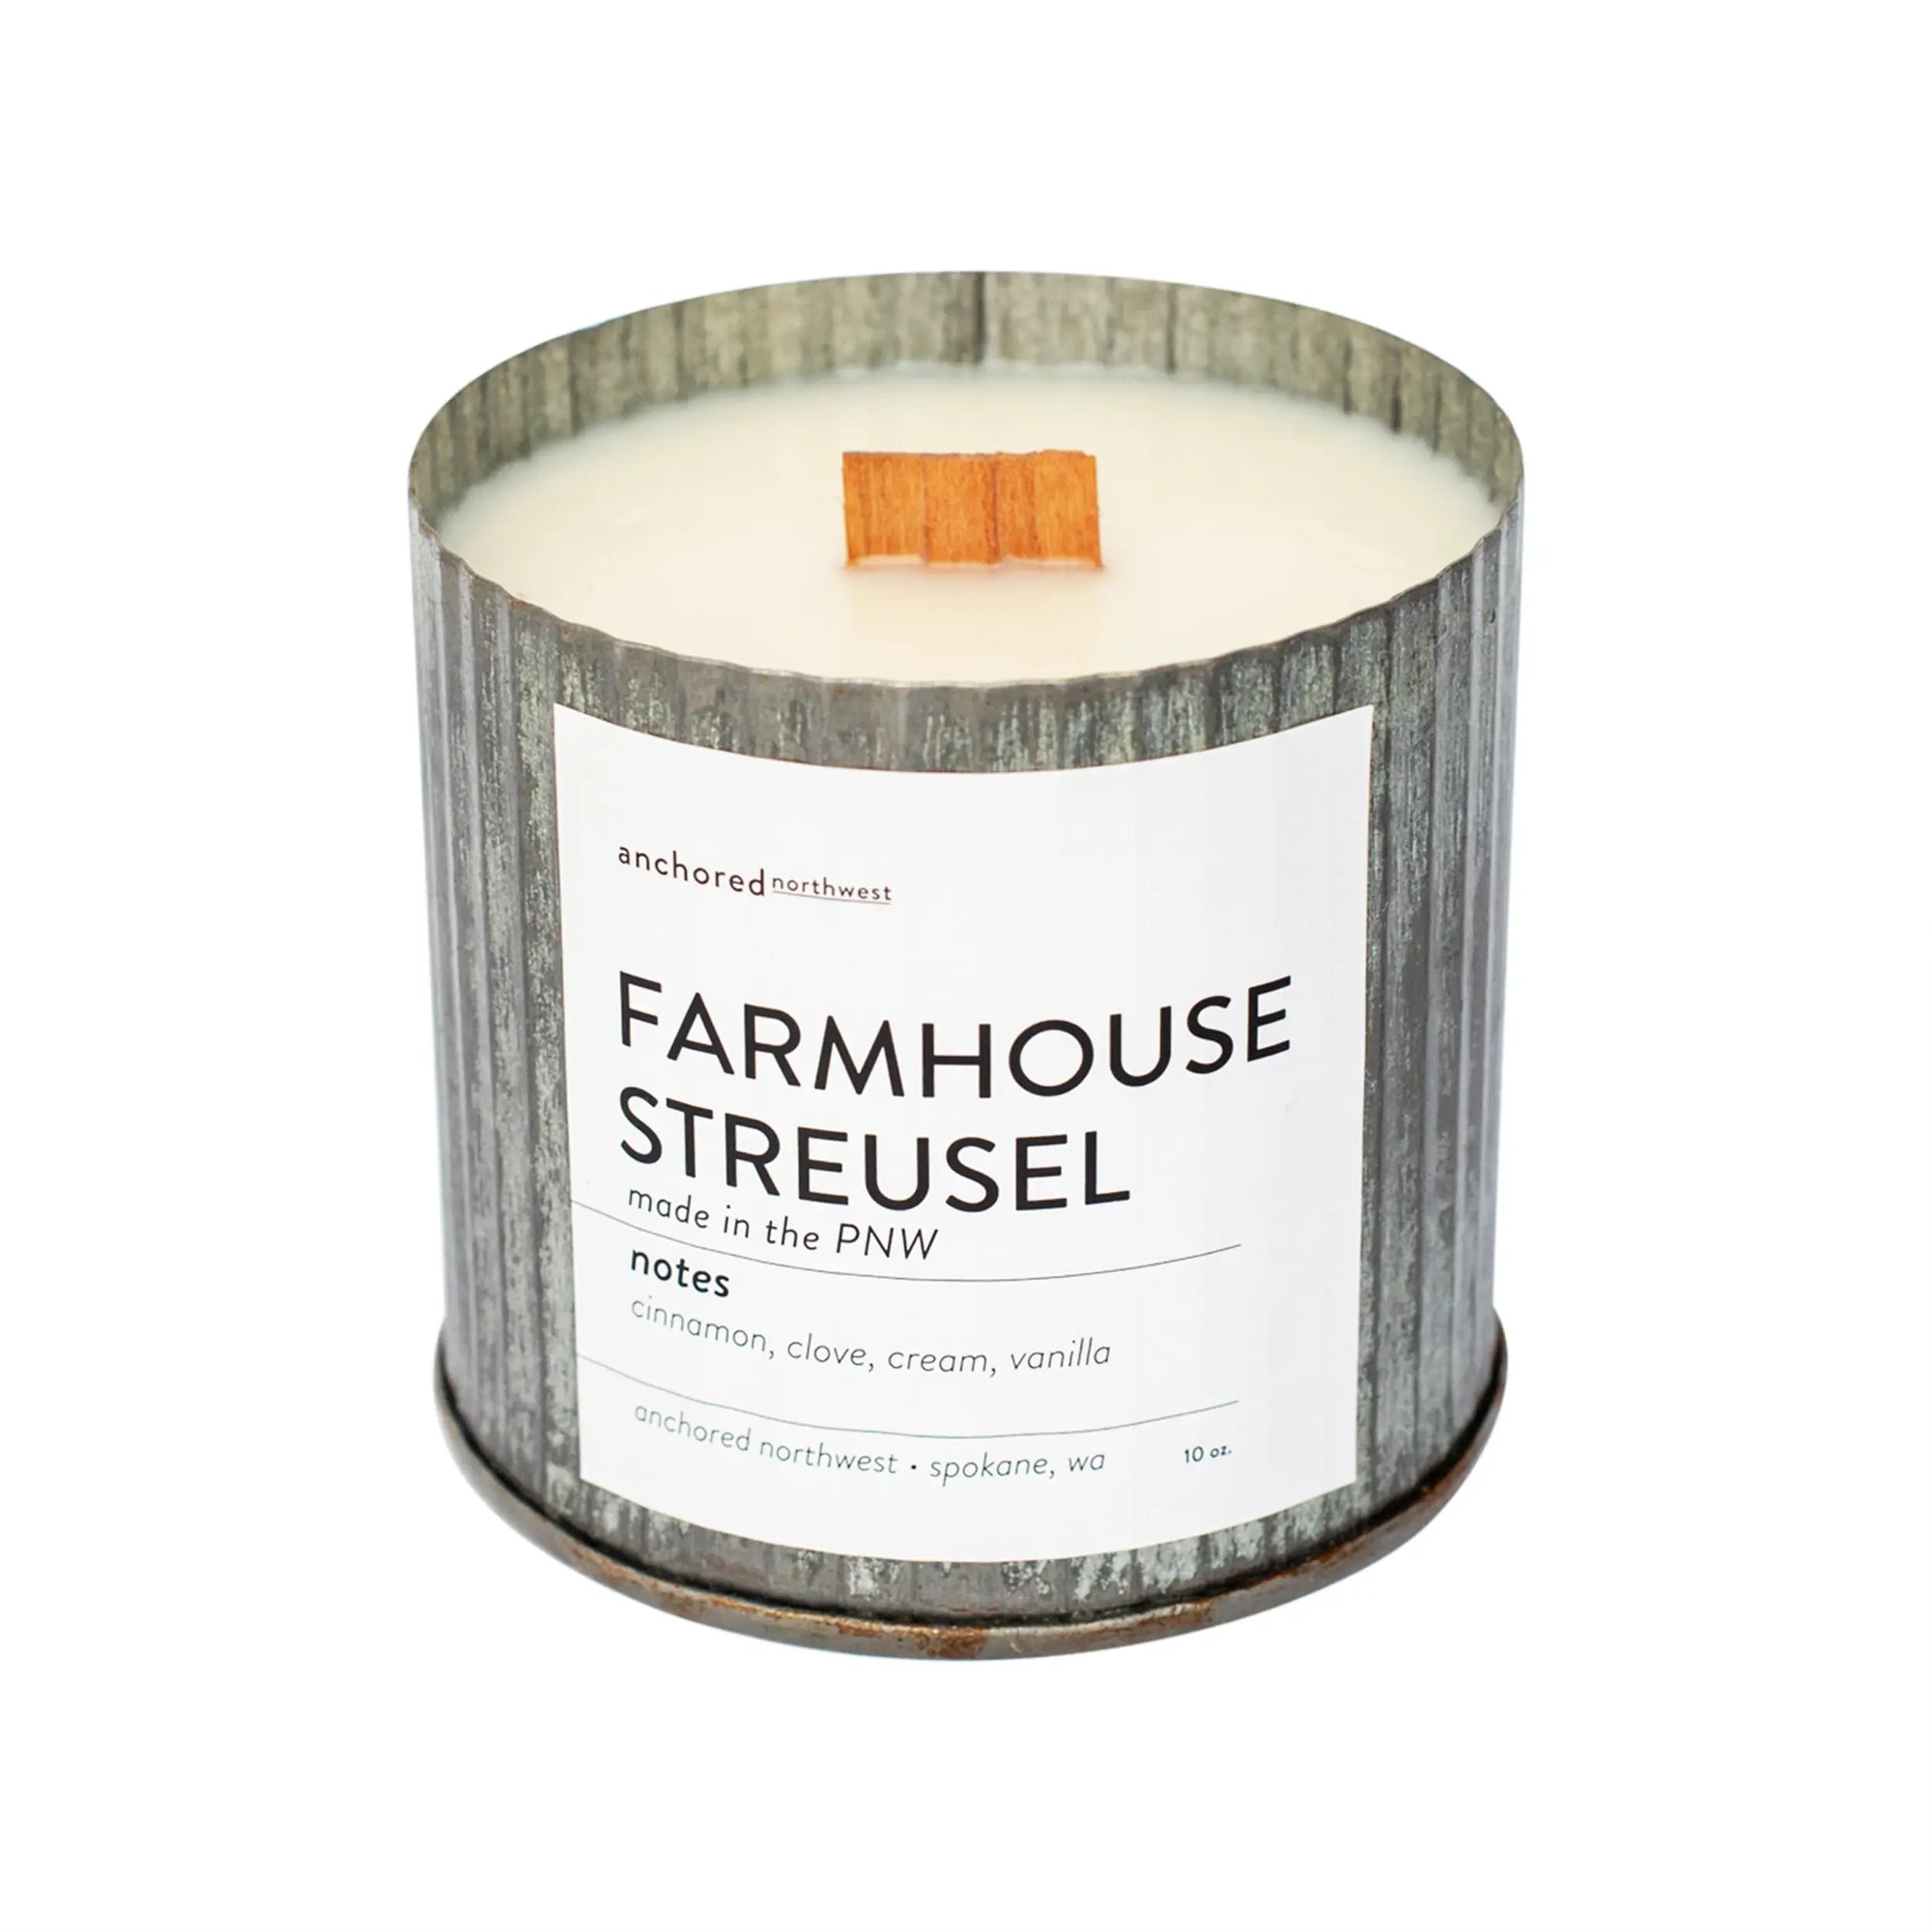 Farmhouse Streusel Wood Wick Rustic Candle - Anchored Northwest